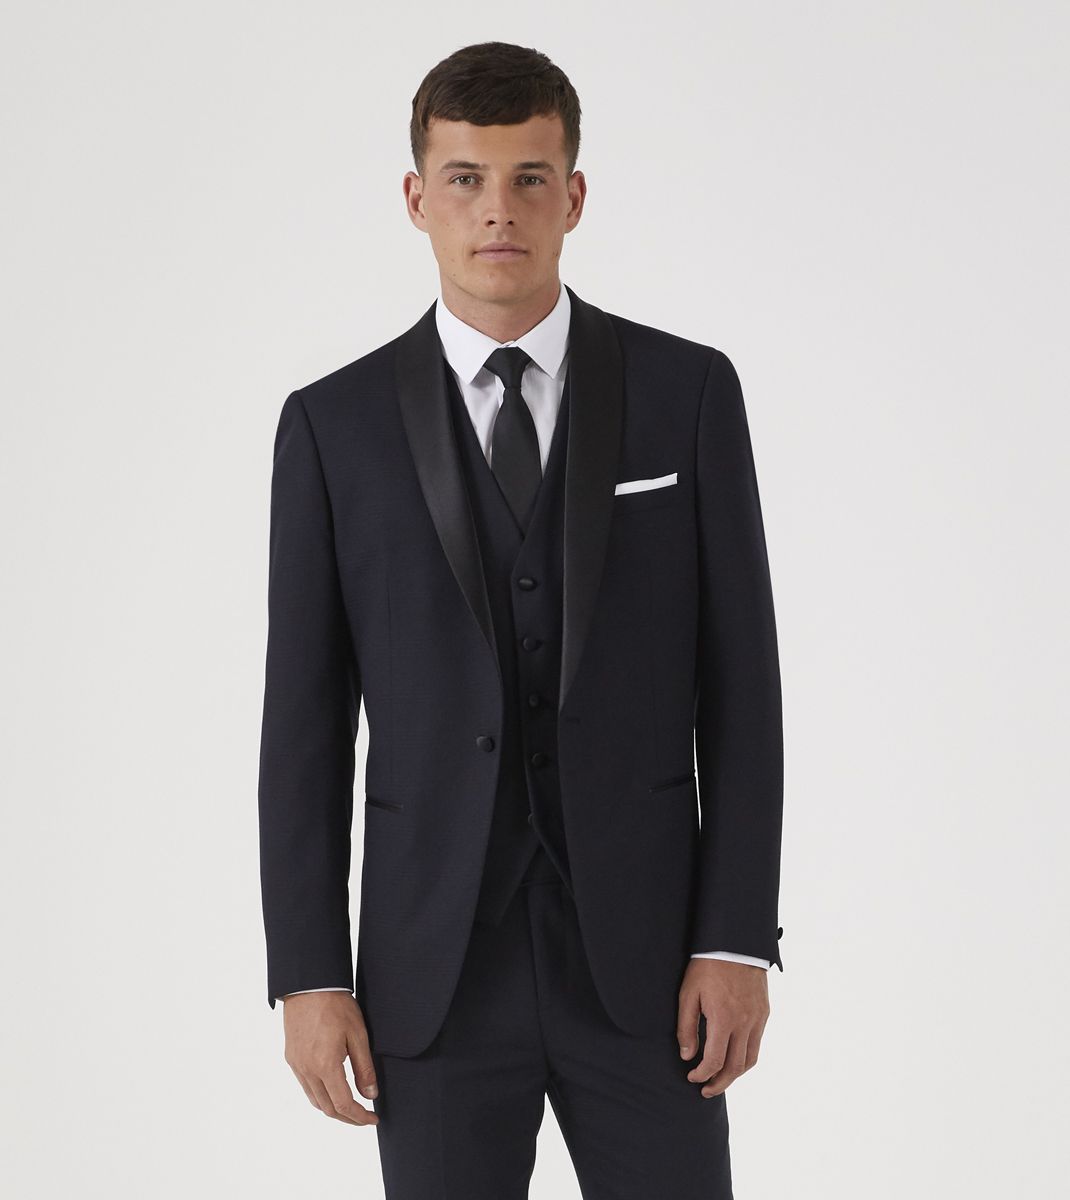 Black shawl collar dinner suit purchase only